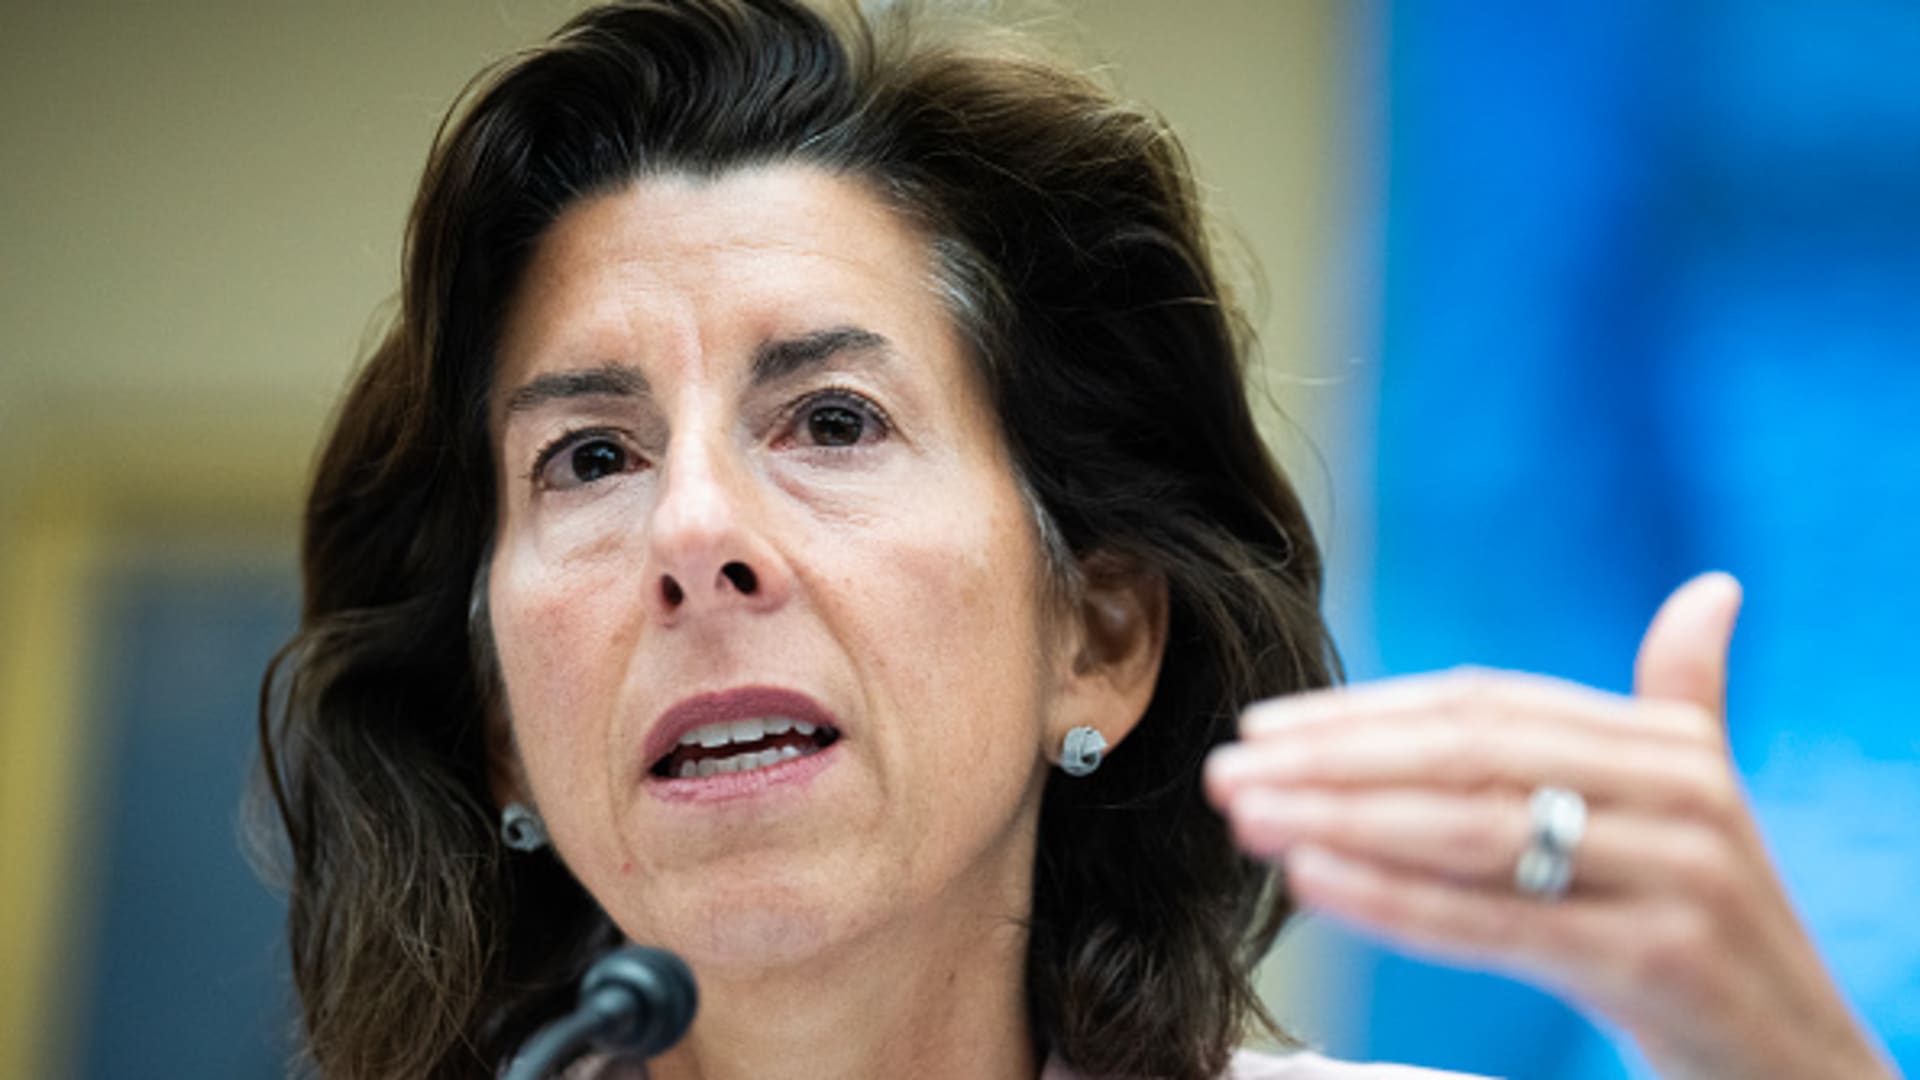 Democrats ask Raimondo to step up enforcement on CHIPS funding